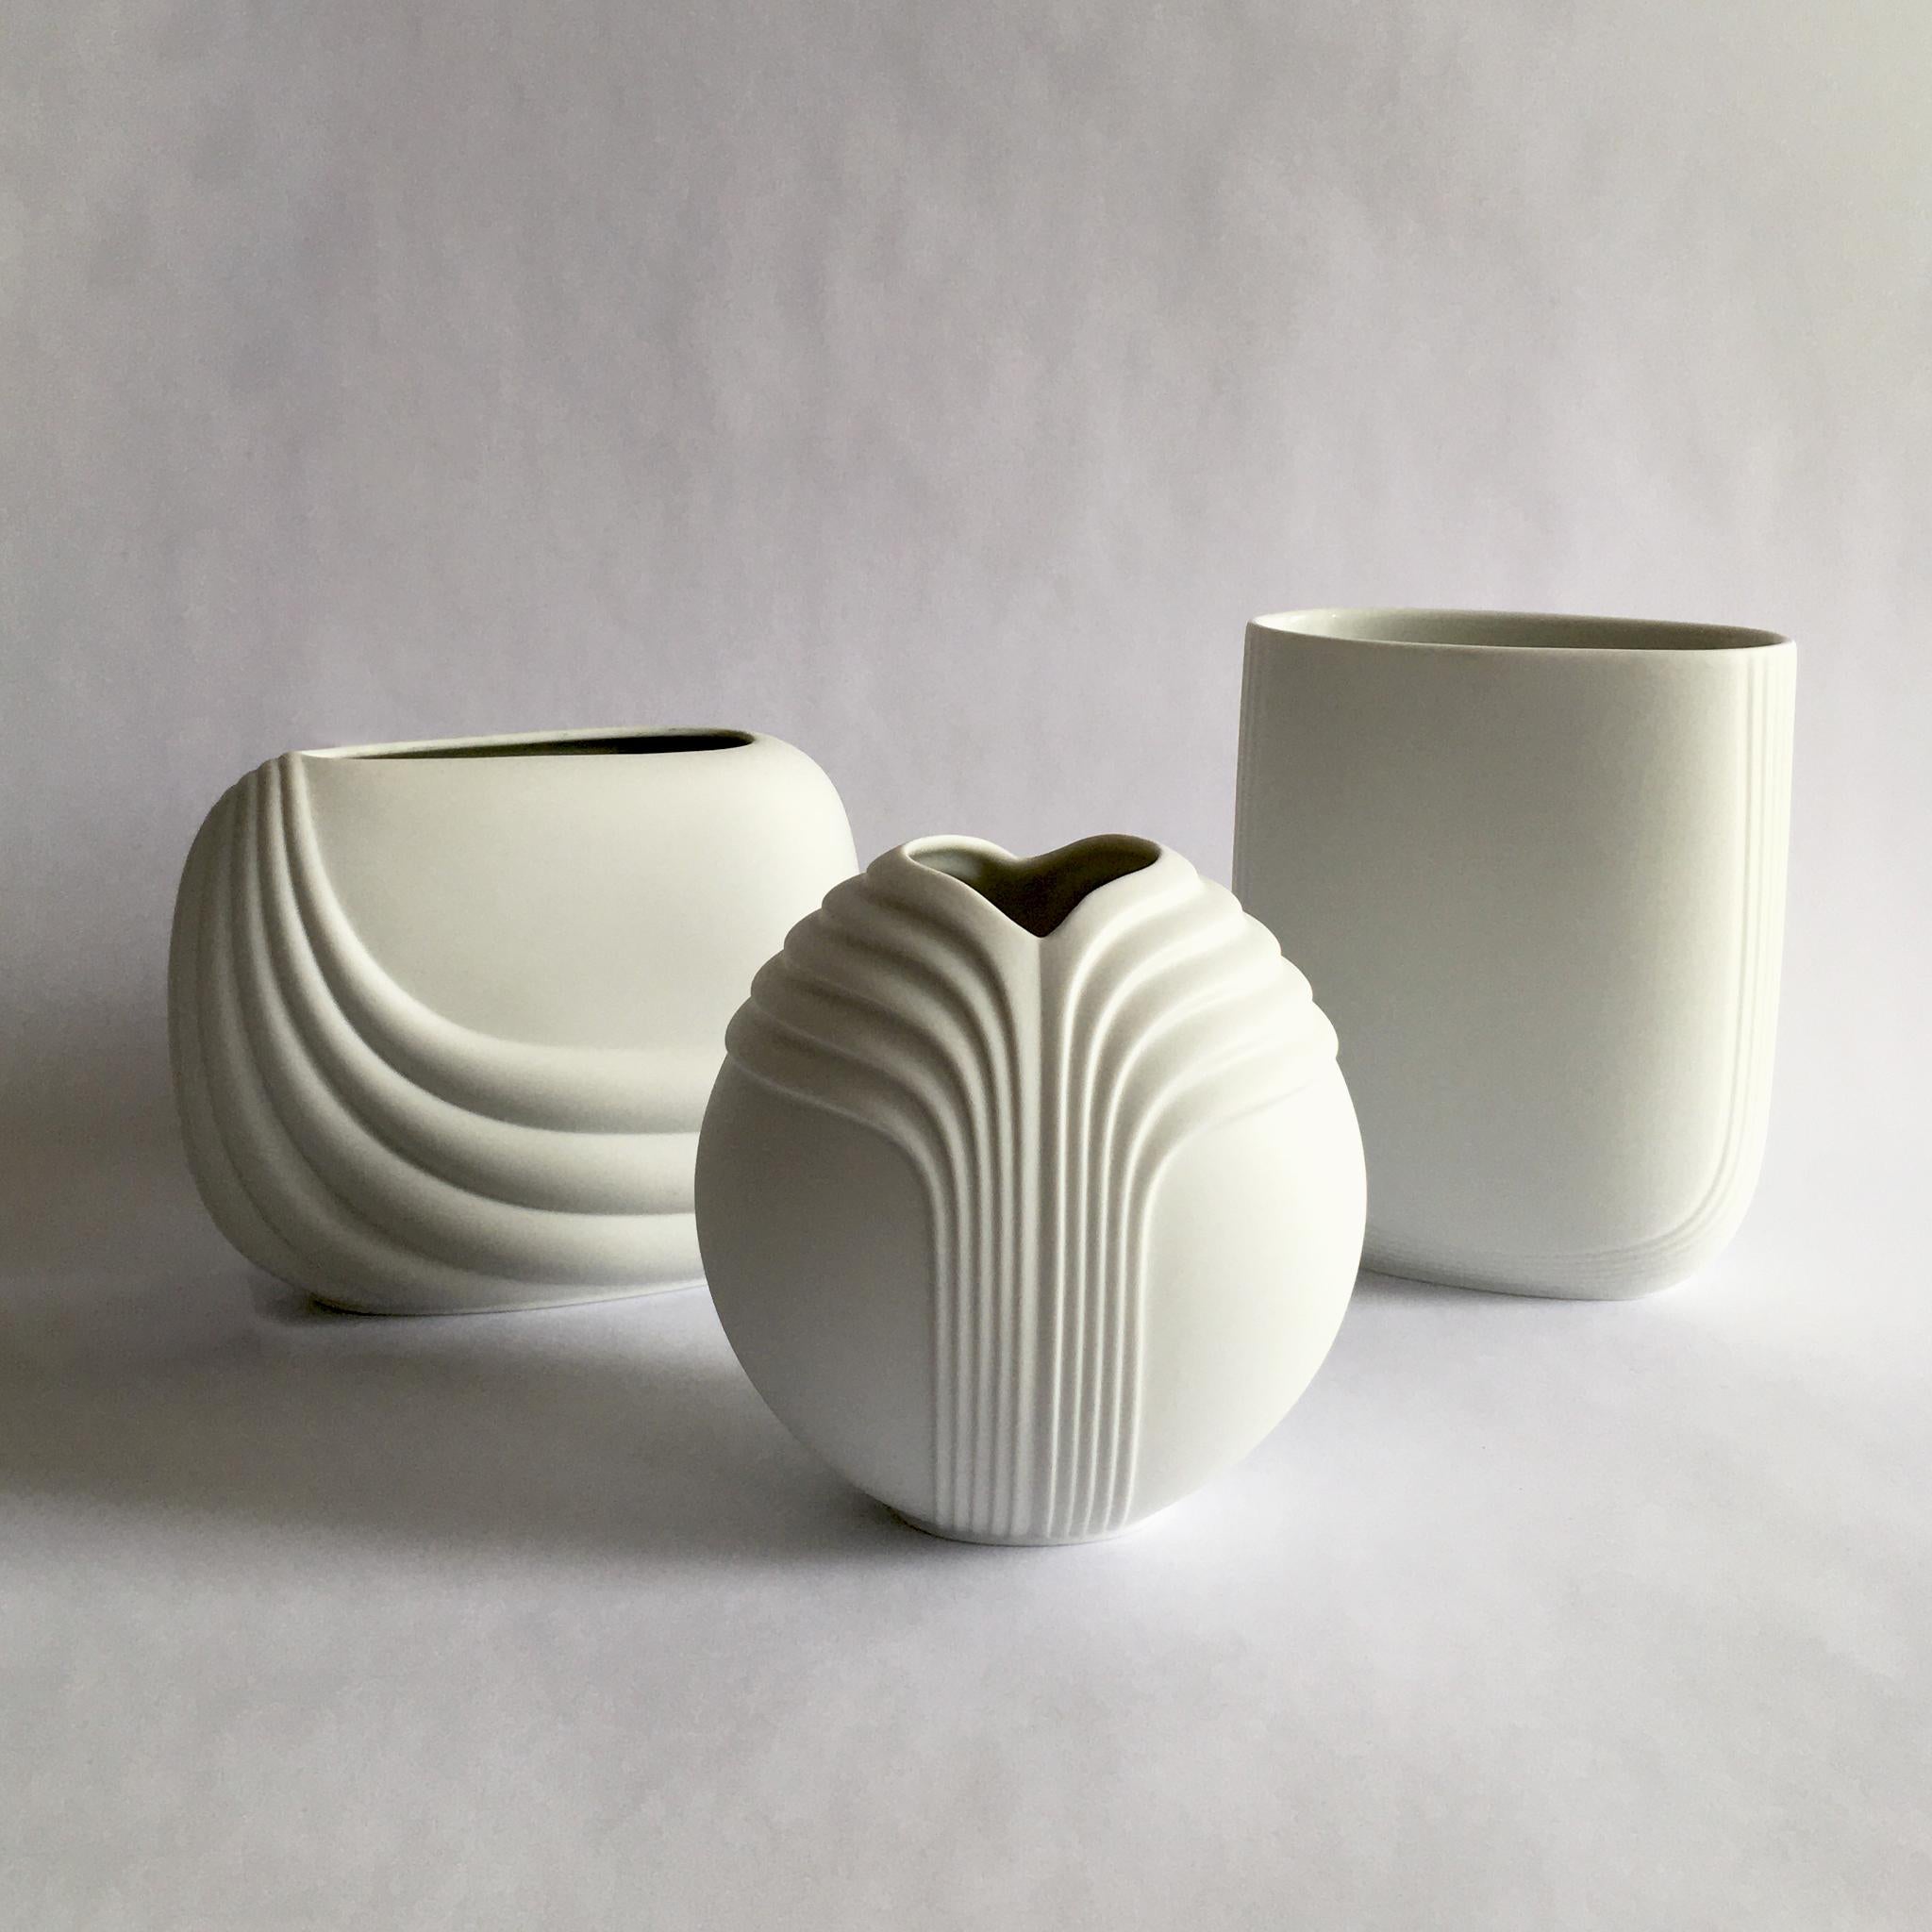 Rosenthal Studio Line by Christa Hausler-Goltz, White Porcelain Bisque Vase In Good Condition For Sale In New York, NY